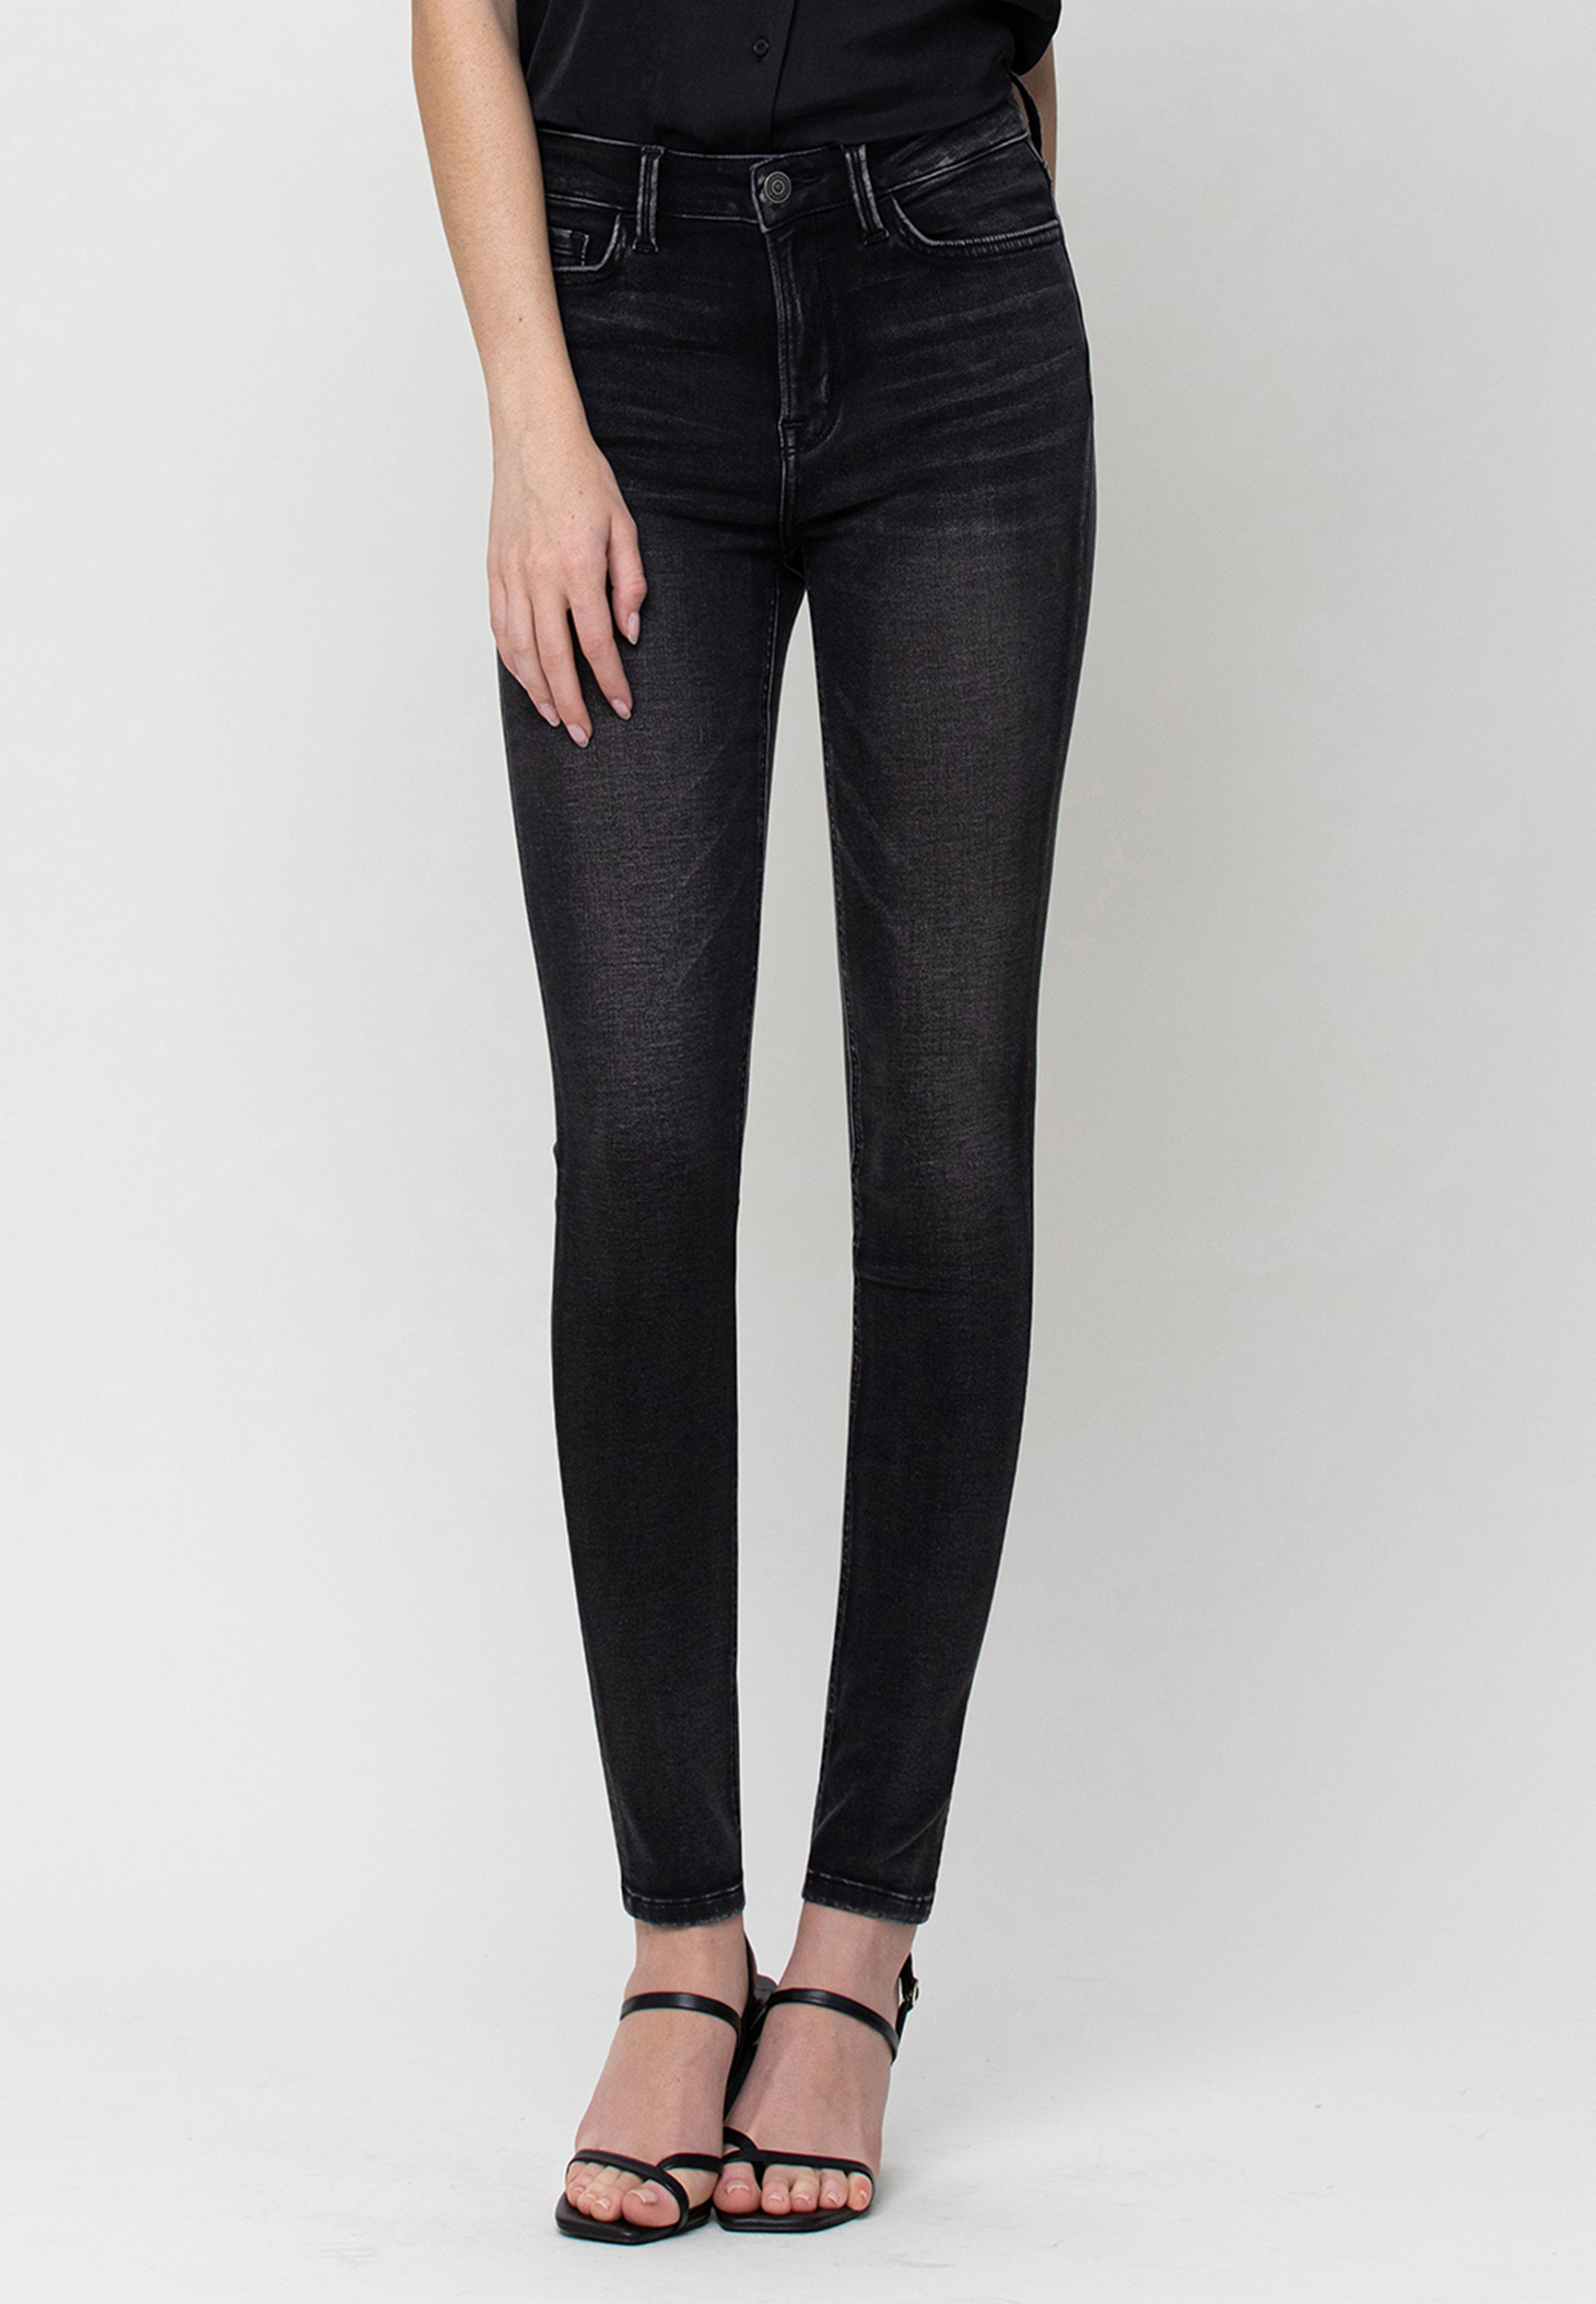 Flying Monkey™ Super Soft High Rise Skinny Jean maurices